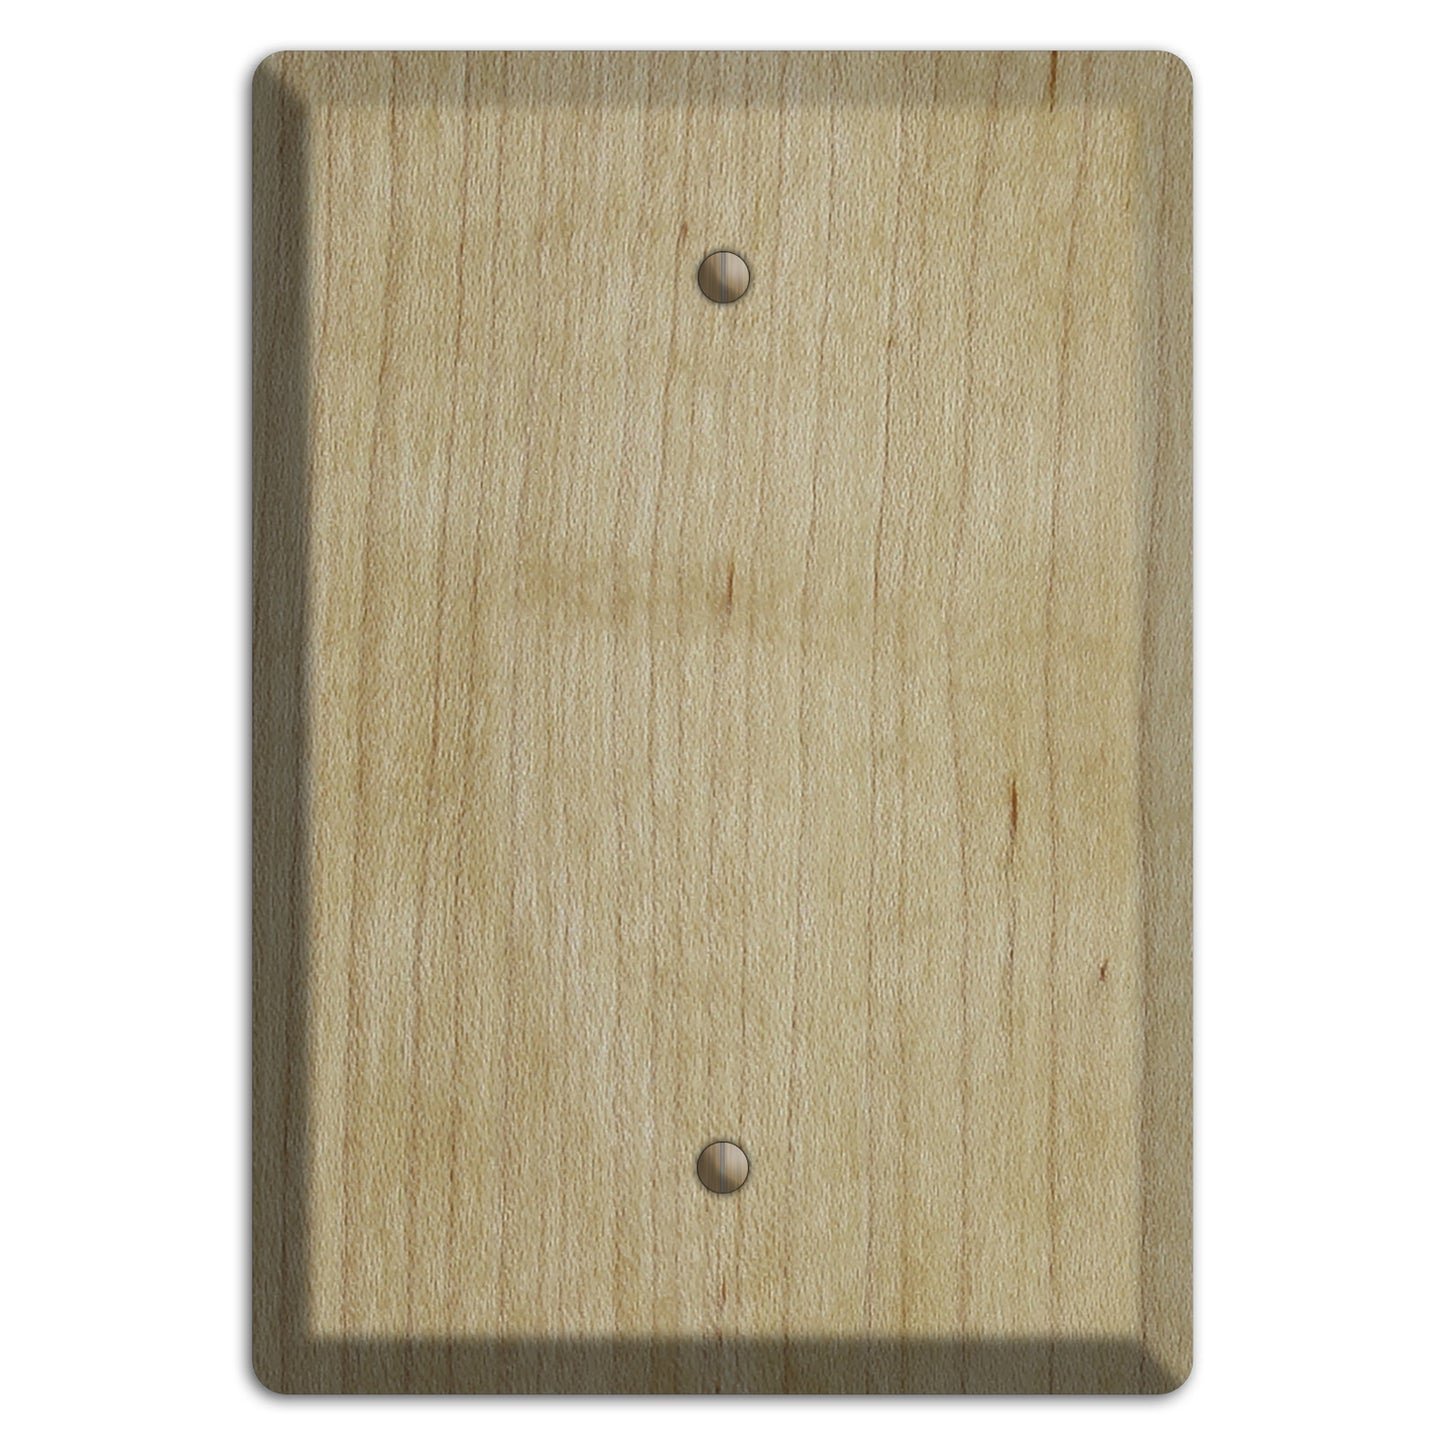 Unfinished Maple Wood Single Blank Cover Plate